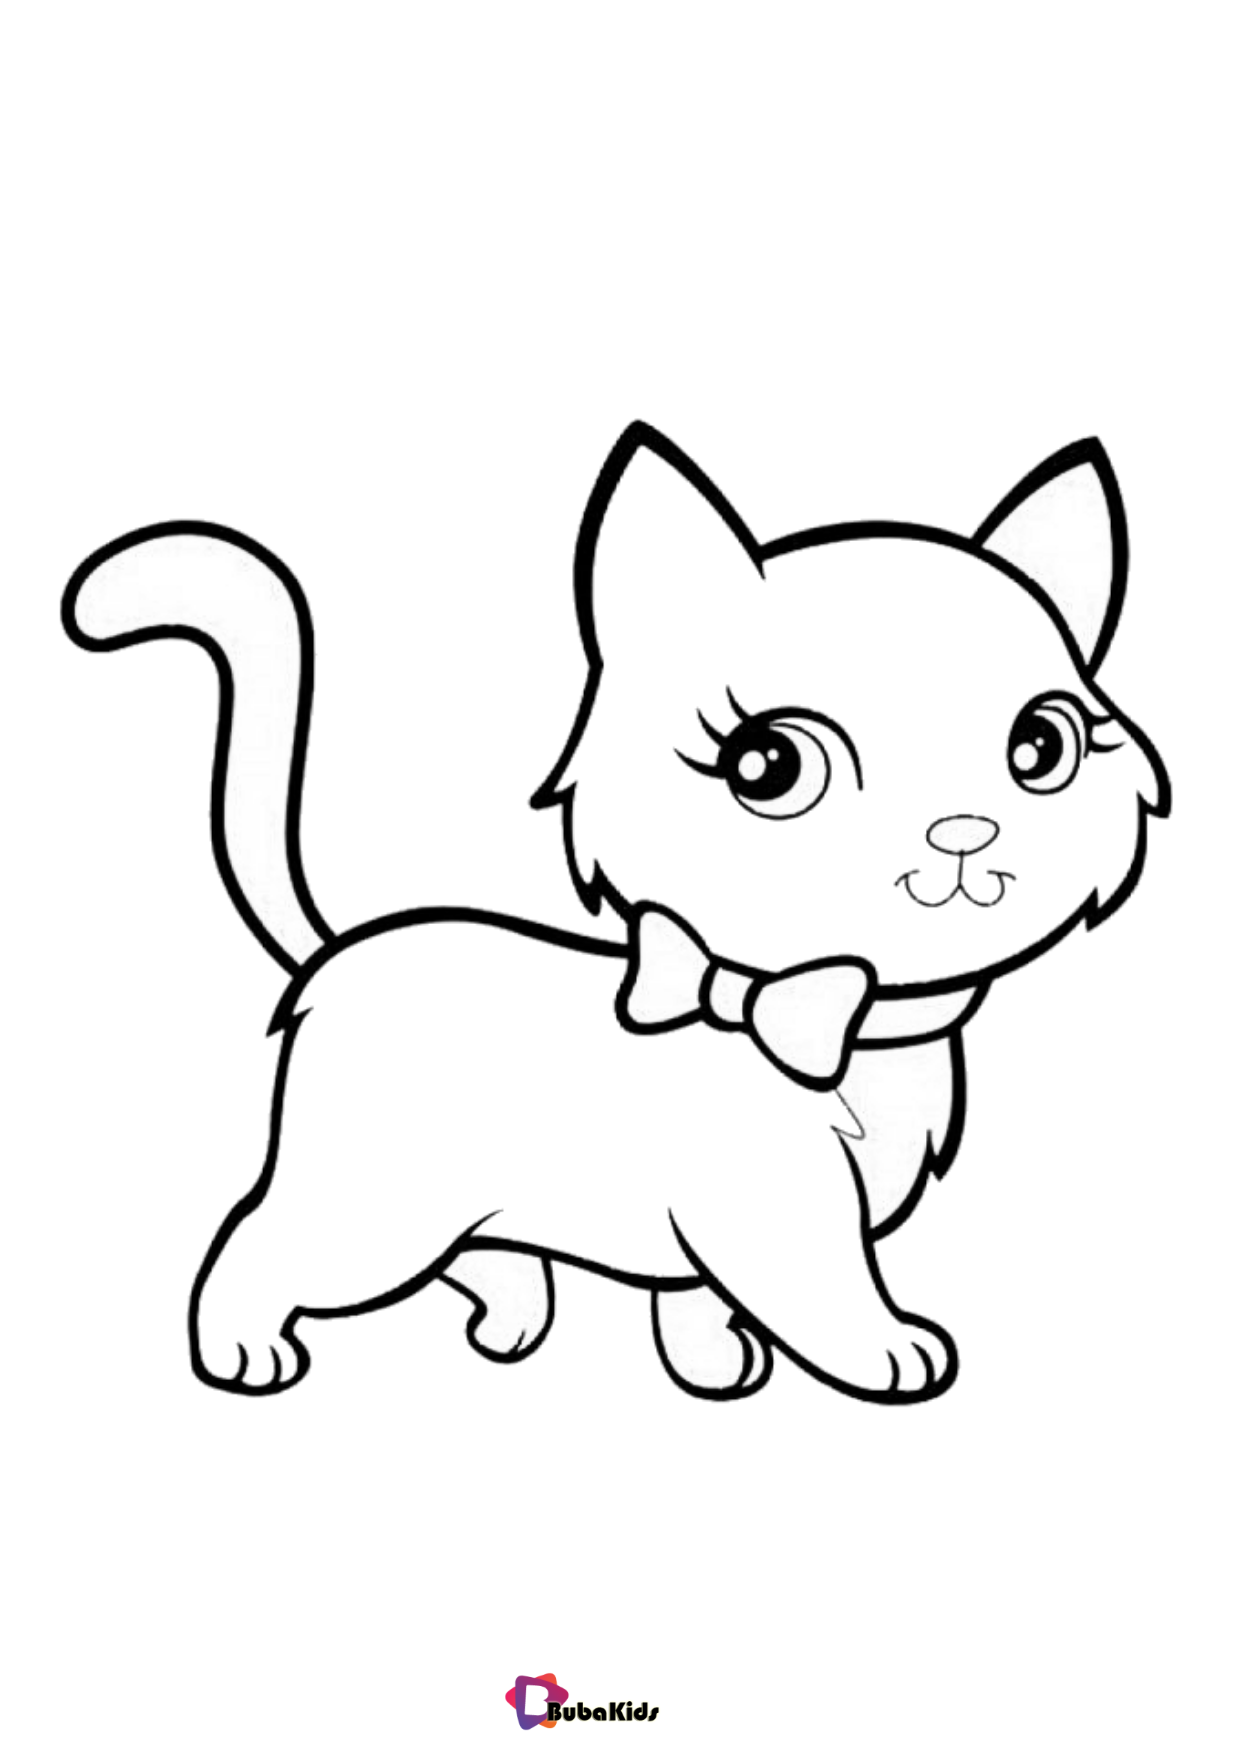 Cute kitten coloring page for kids colouring pages - BubaKids.com